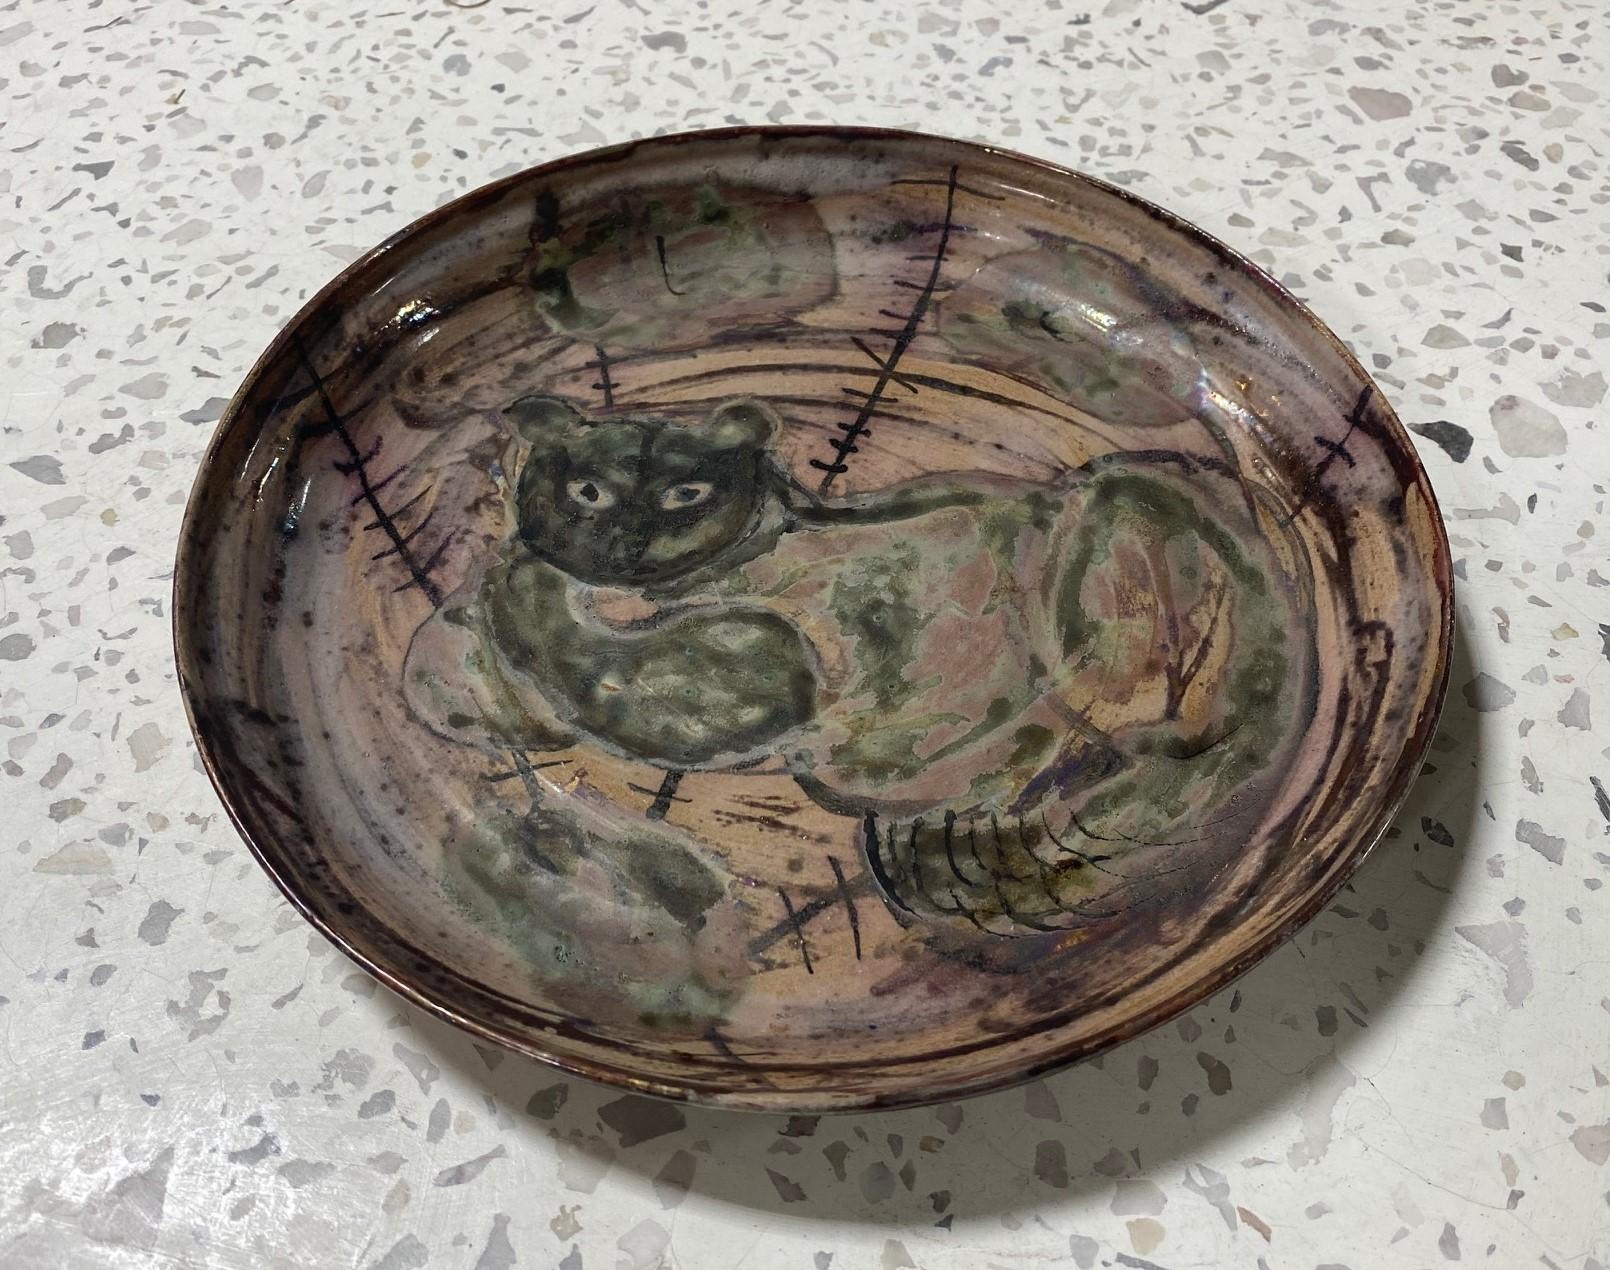 A relatively rare and wonderfully hand-painted charger featuring a mischievous cat by famed American/ California ceramist Beatrice Wood. The portrait of the feline features Wood's unmistakable whimsical and playful touch and is richly colored and